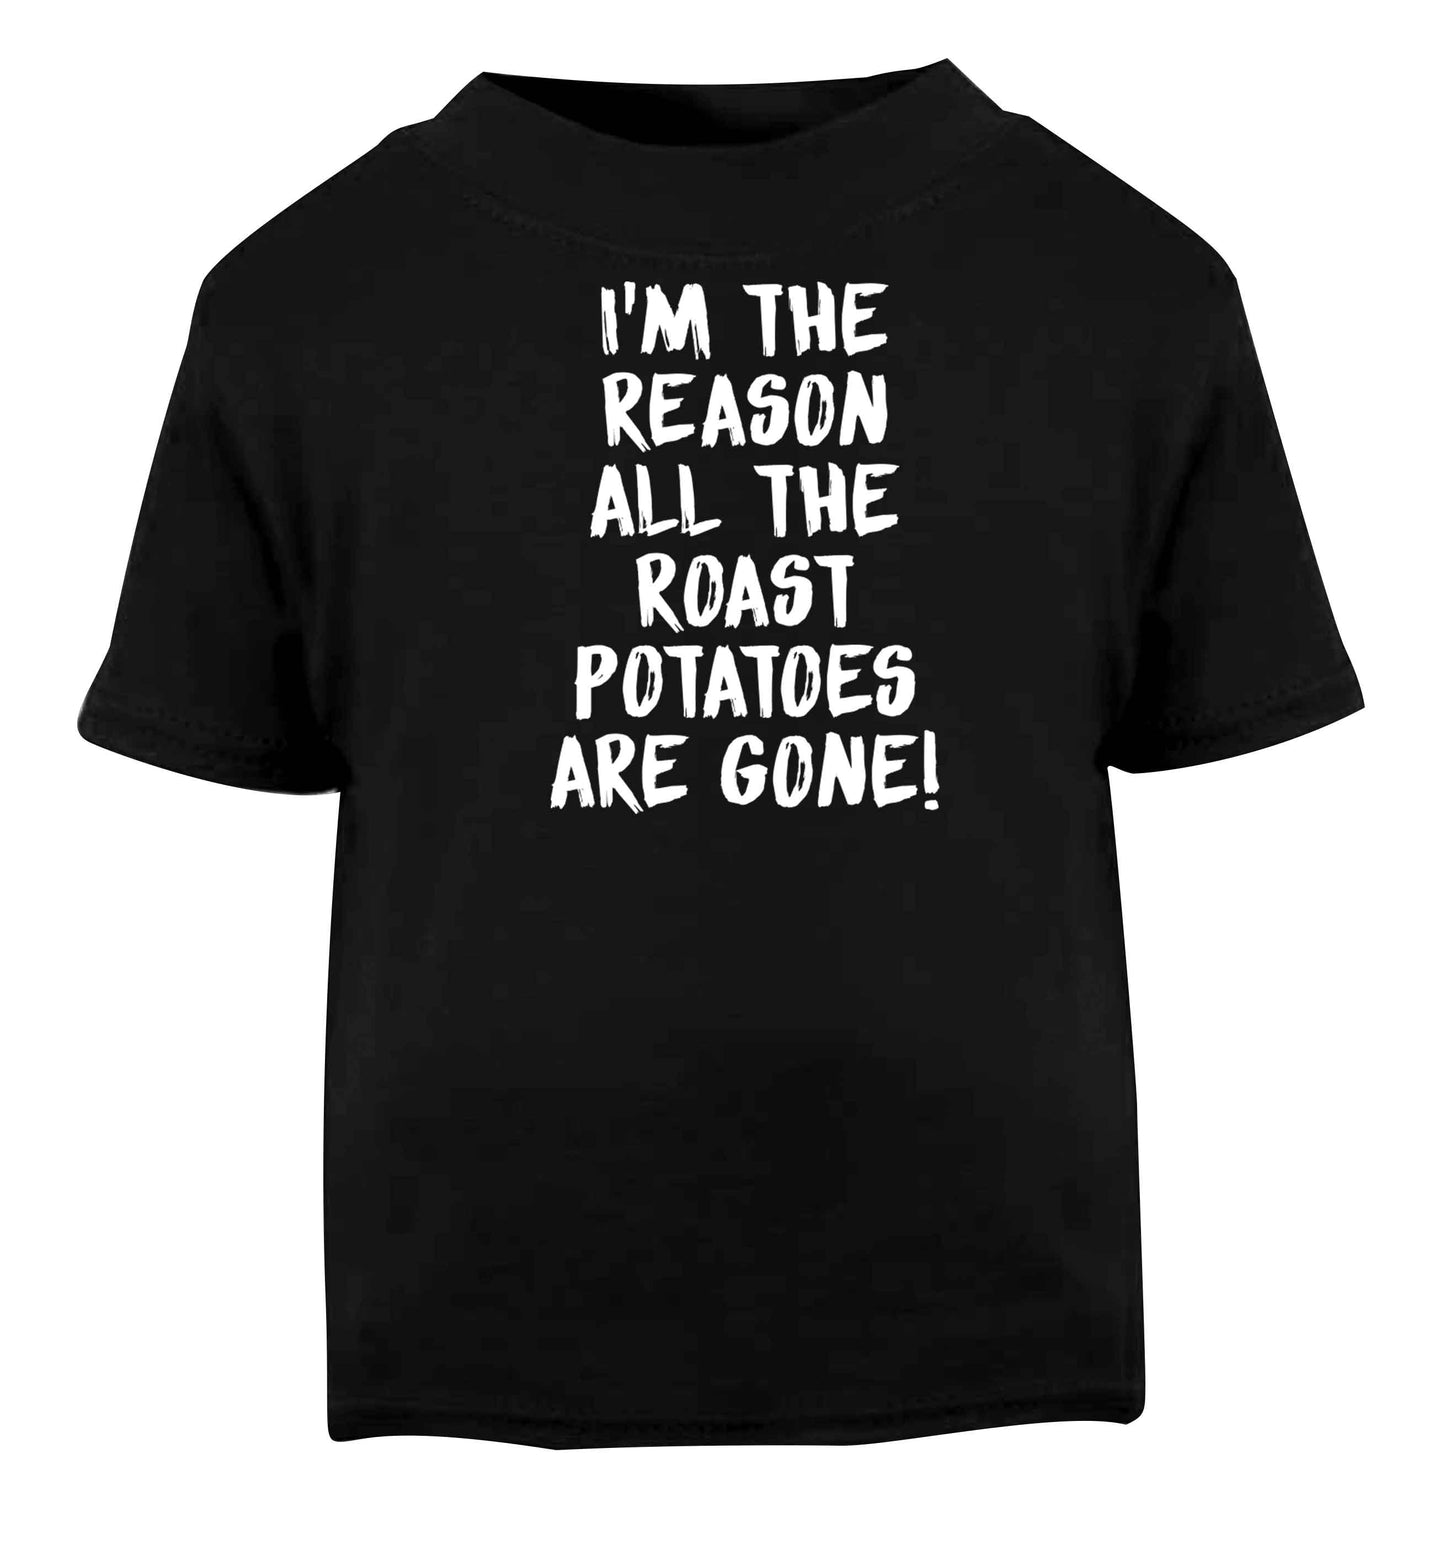 I'm the reason all the roast potatoes are gone Black baby toddler Tshirt 2 years